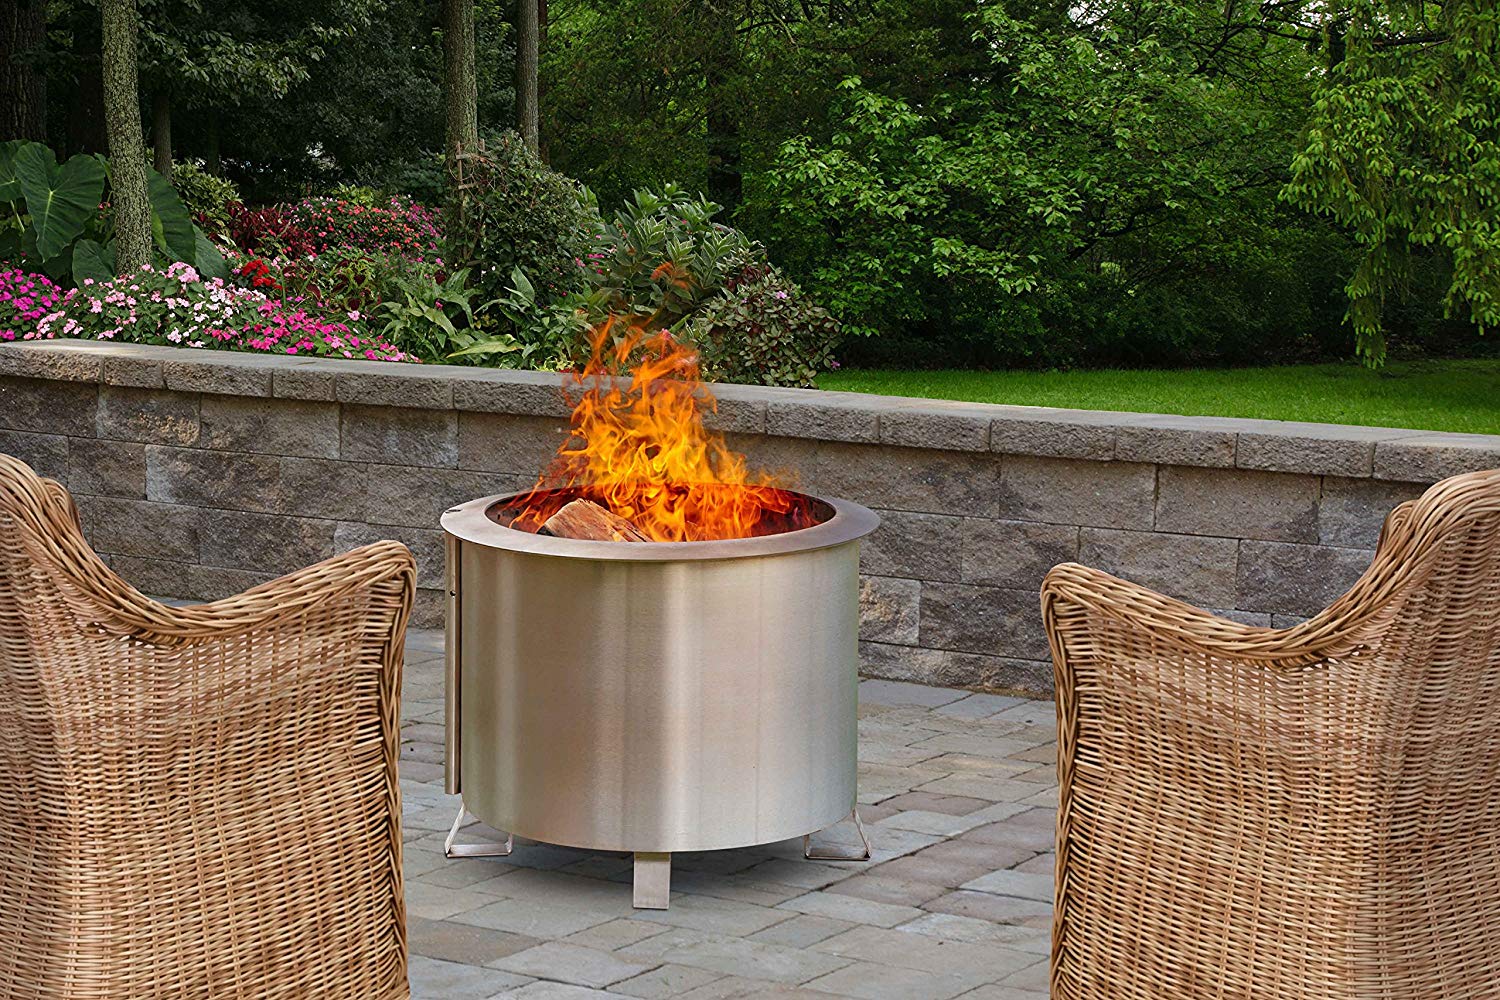 Top 10 Best Smokeless Fire Pit To Buy in 2021